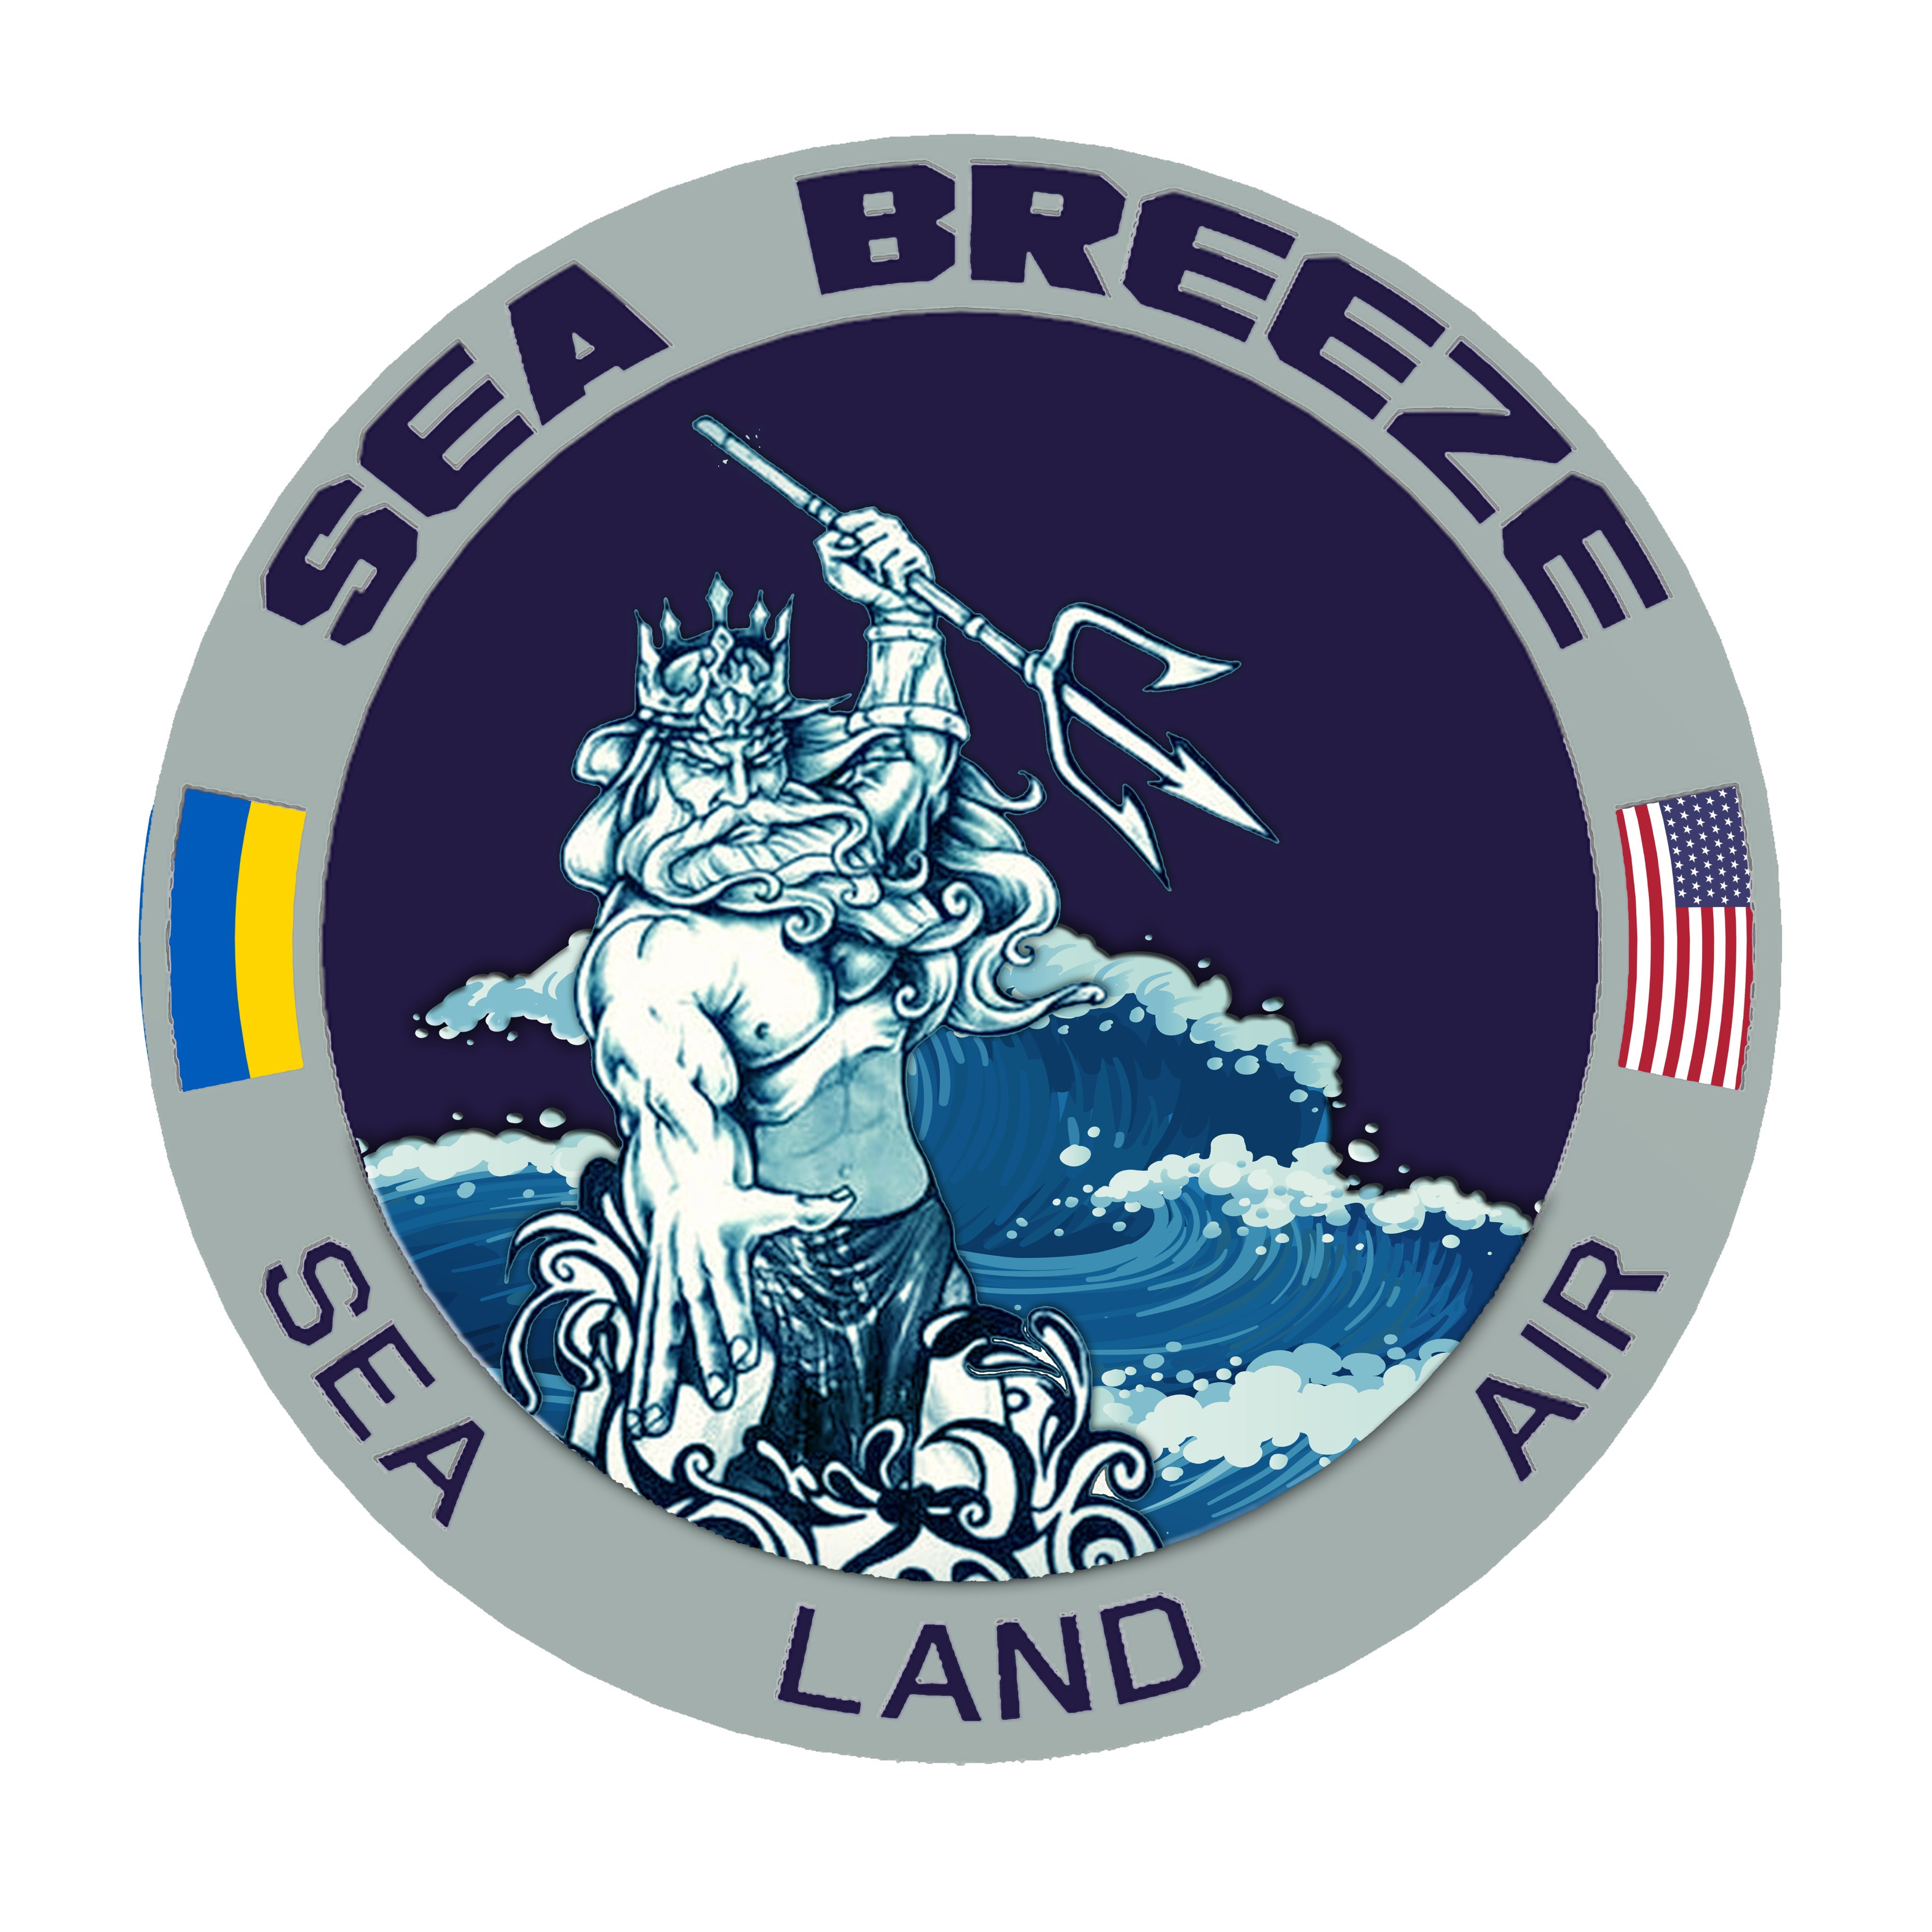 Official Exercise Sea Breeze Account. Ukraine 🇺🇦 & U.S. 🇺🇸co-hosted maritime, air, & land exercise since 1997. RT does not equal endorsement.